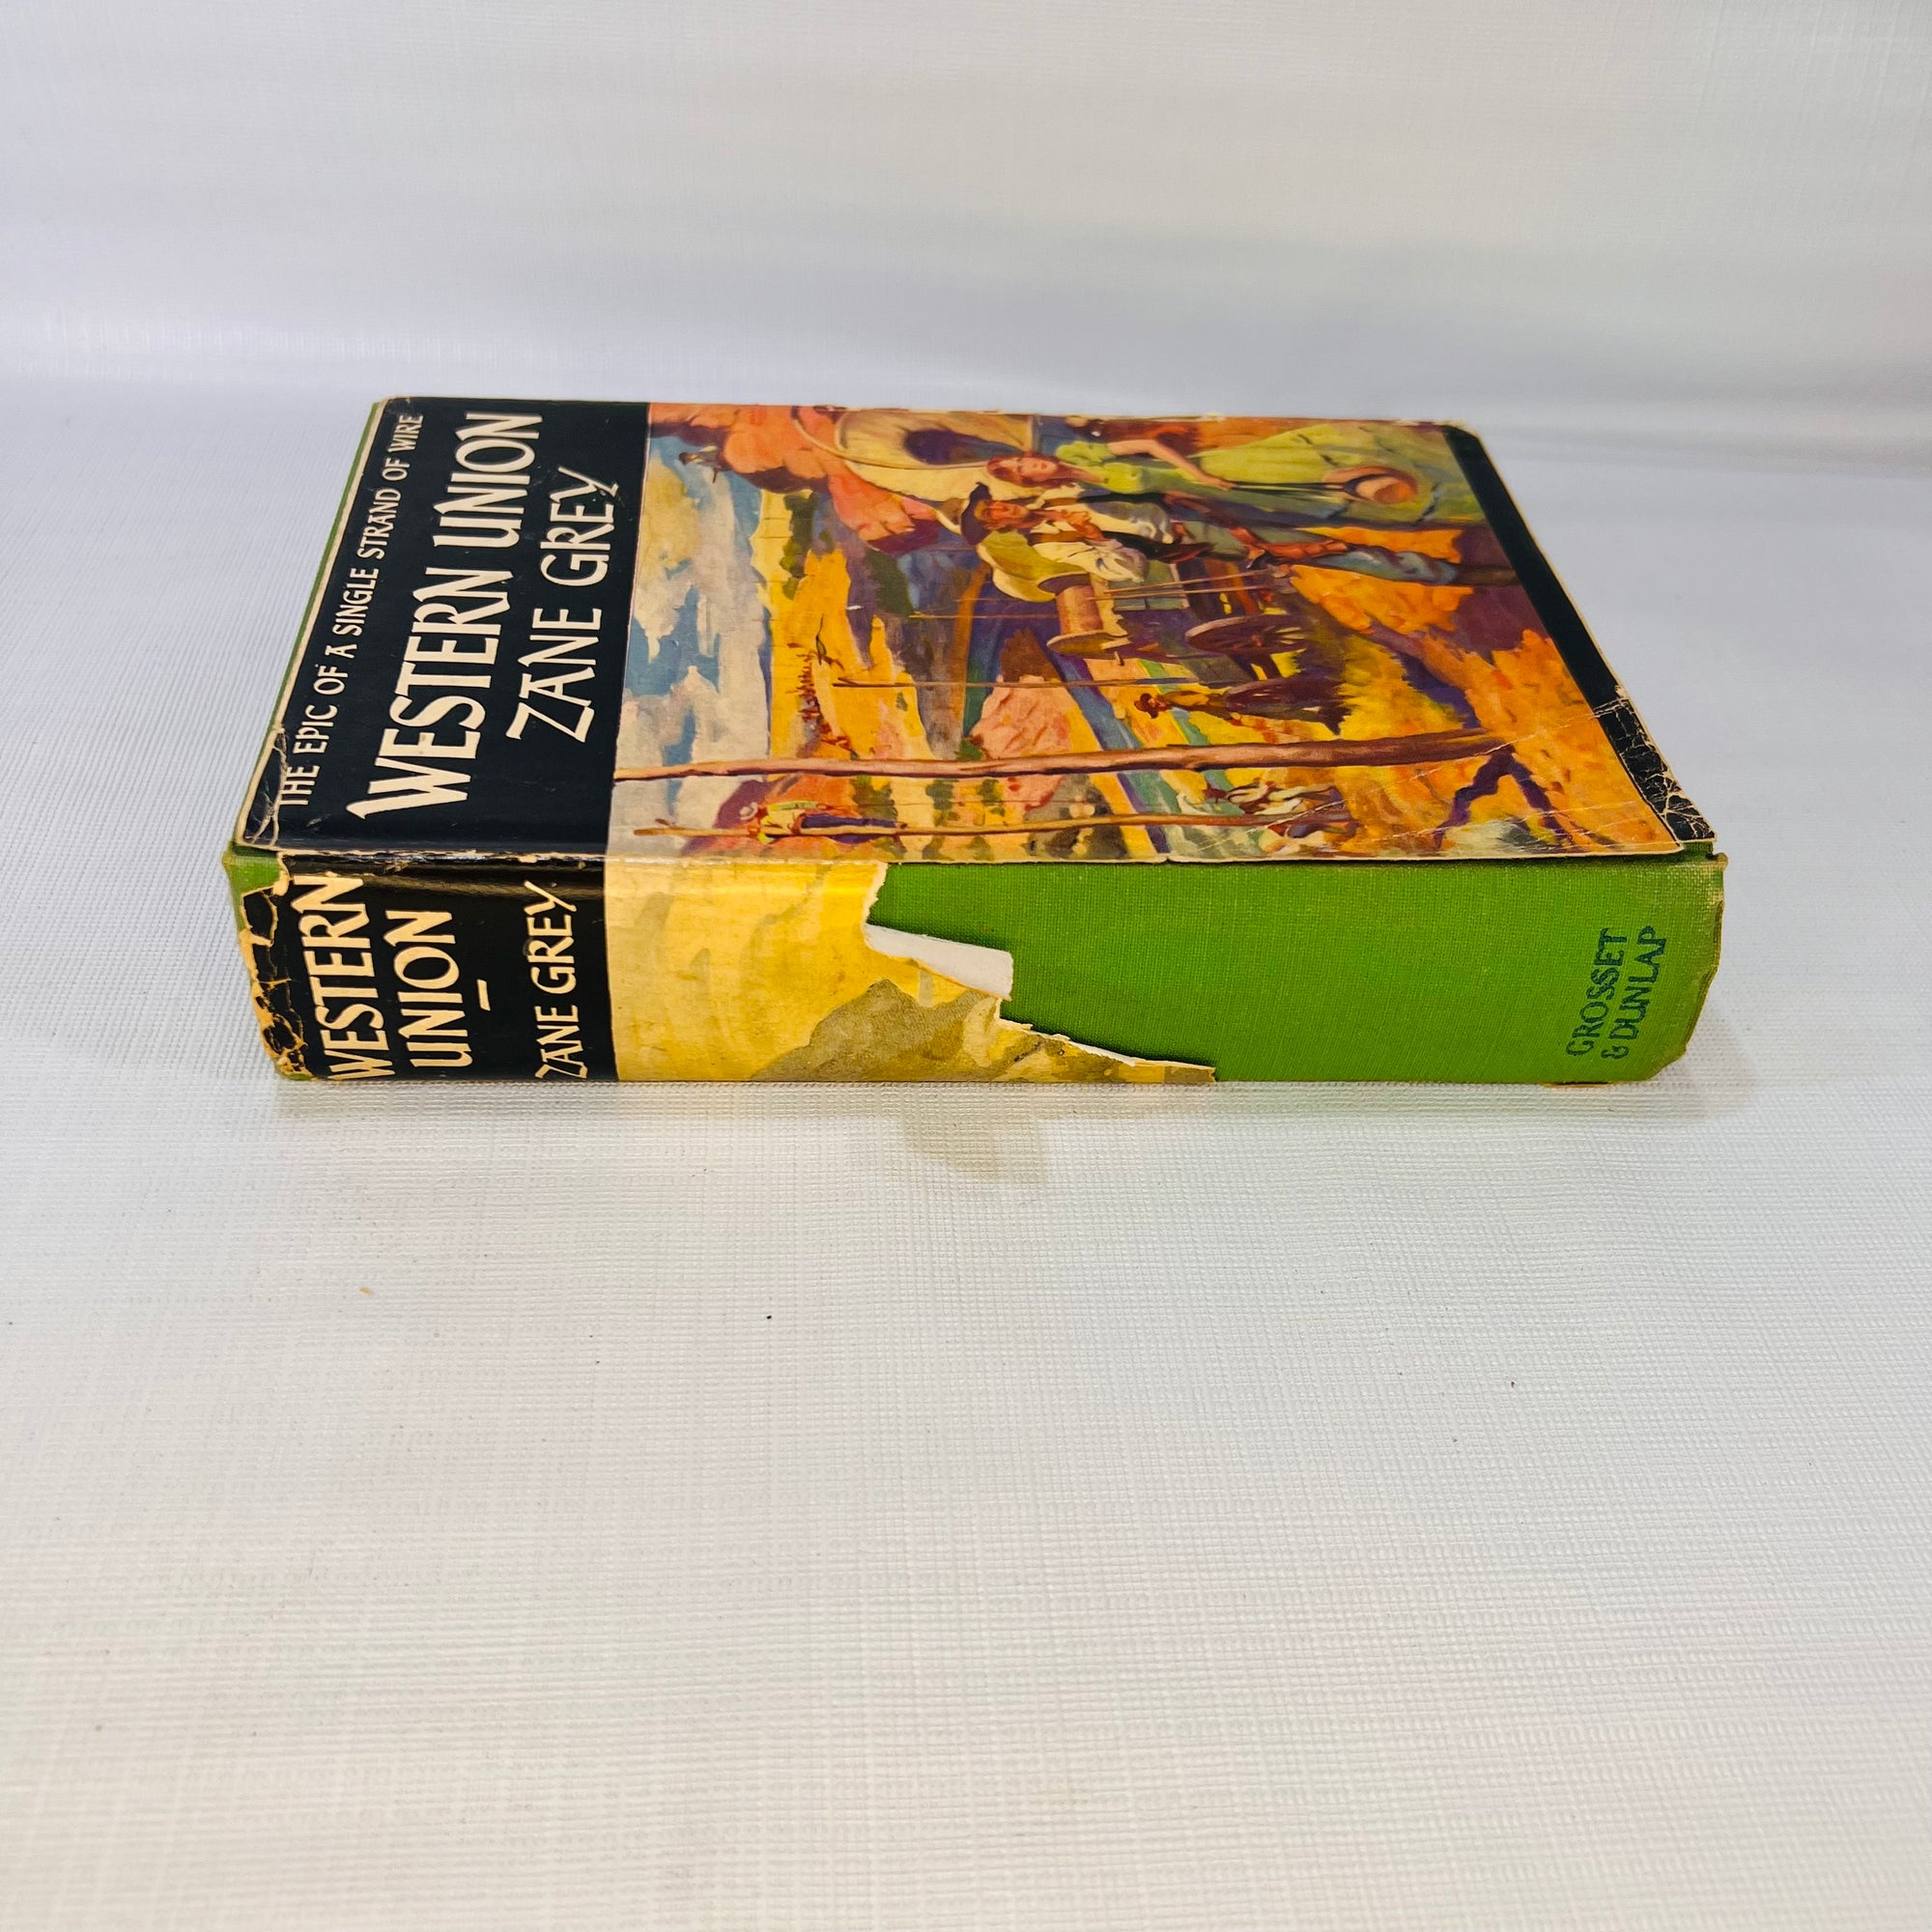 The Epic of a Single Strand of Wire Western Union by Zane Grey 1939 Grosset & Dunlap